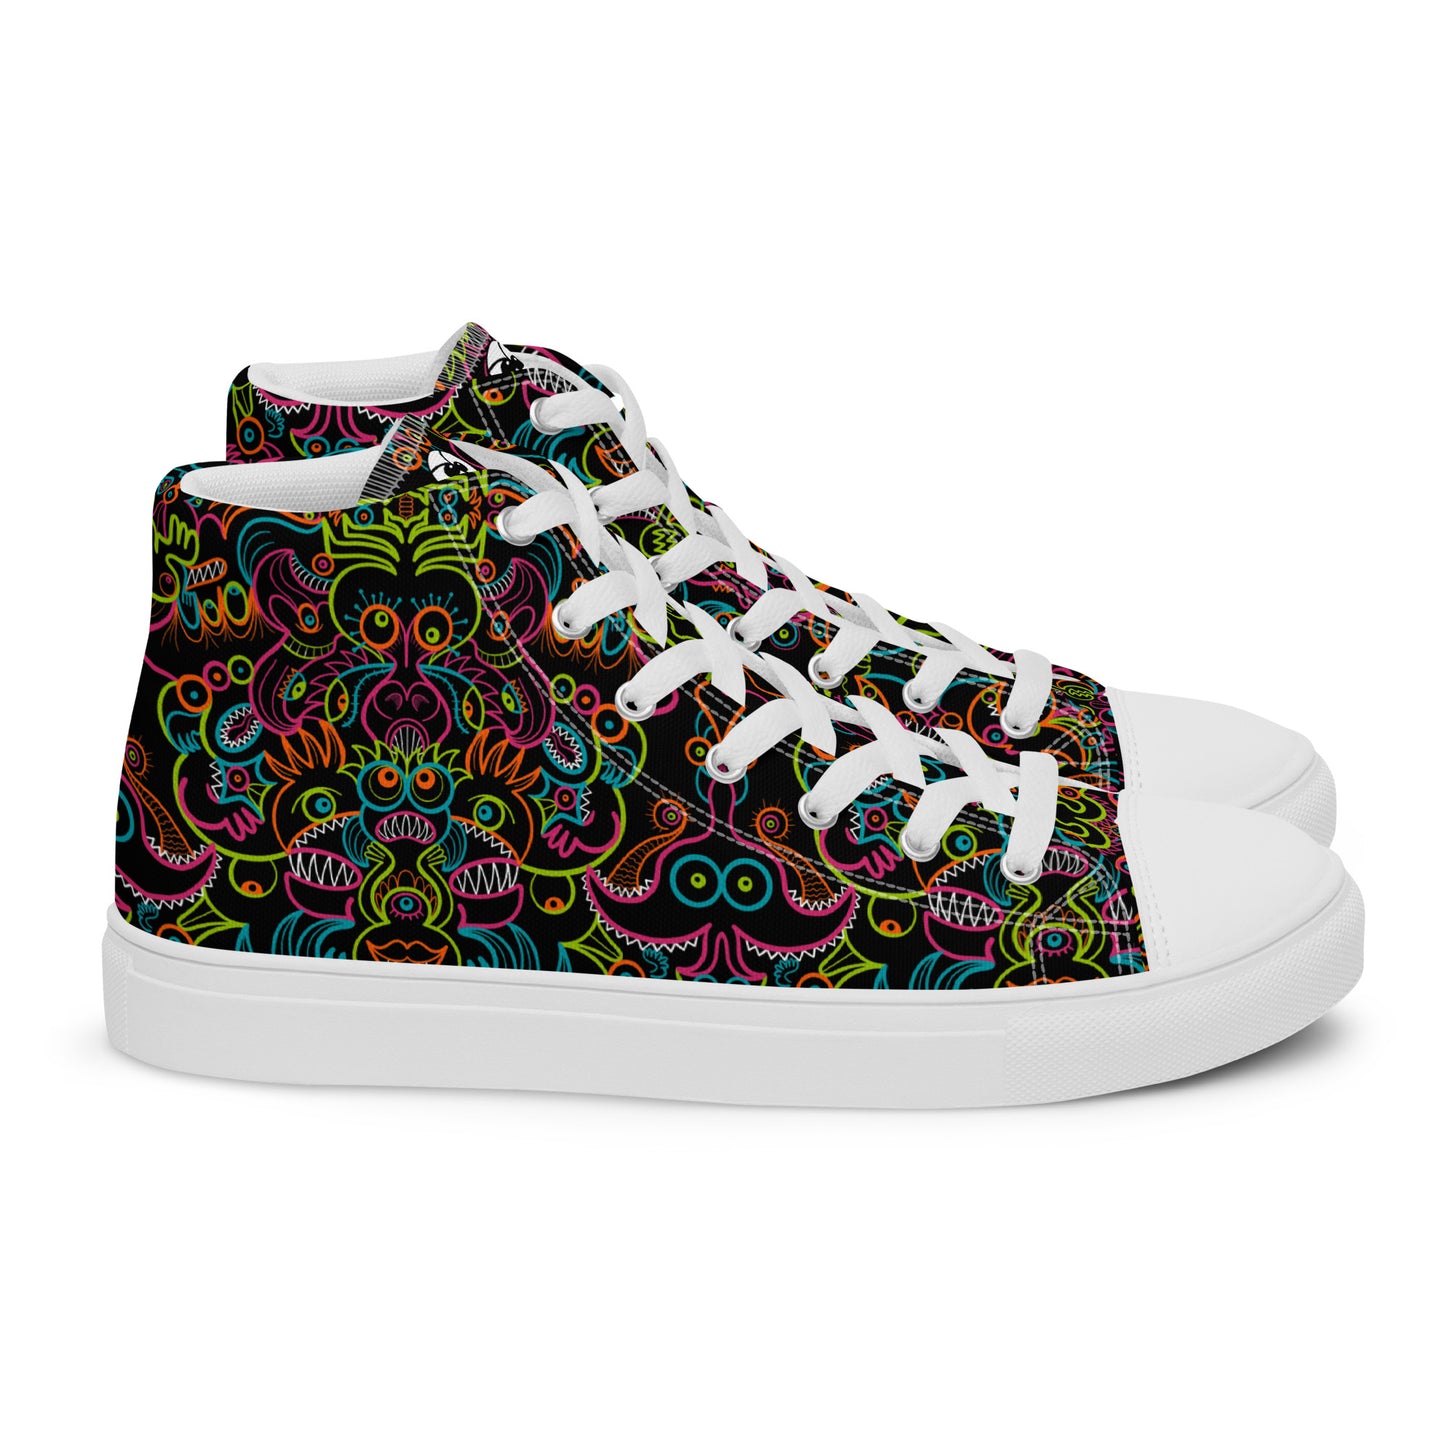 Doodle Carnival: A Kaleidoscope of Whimsical Wonders! - Women’s high top canvas shoes. White color. Side view